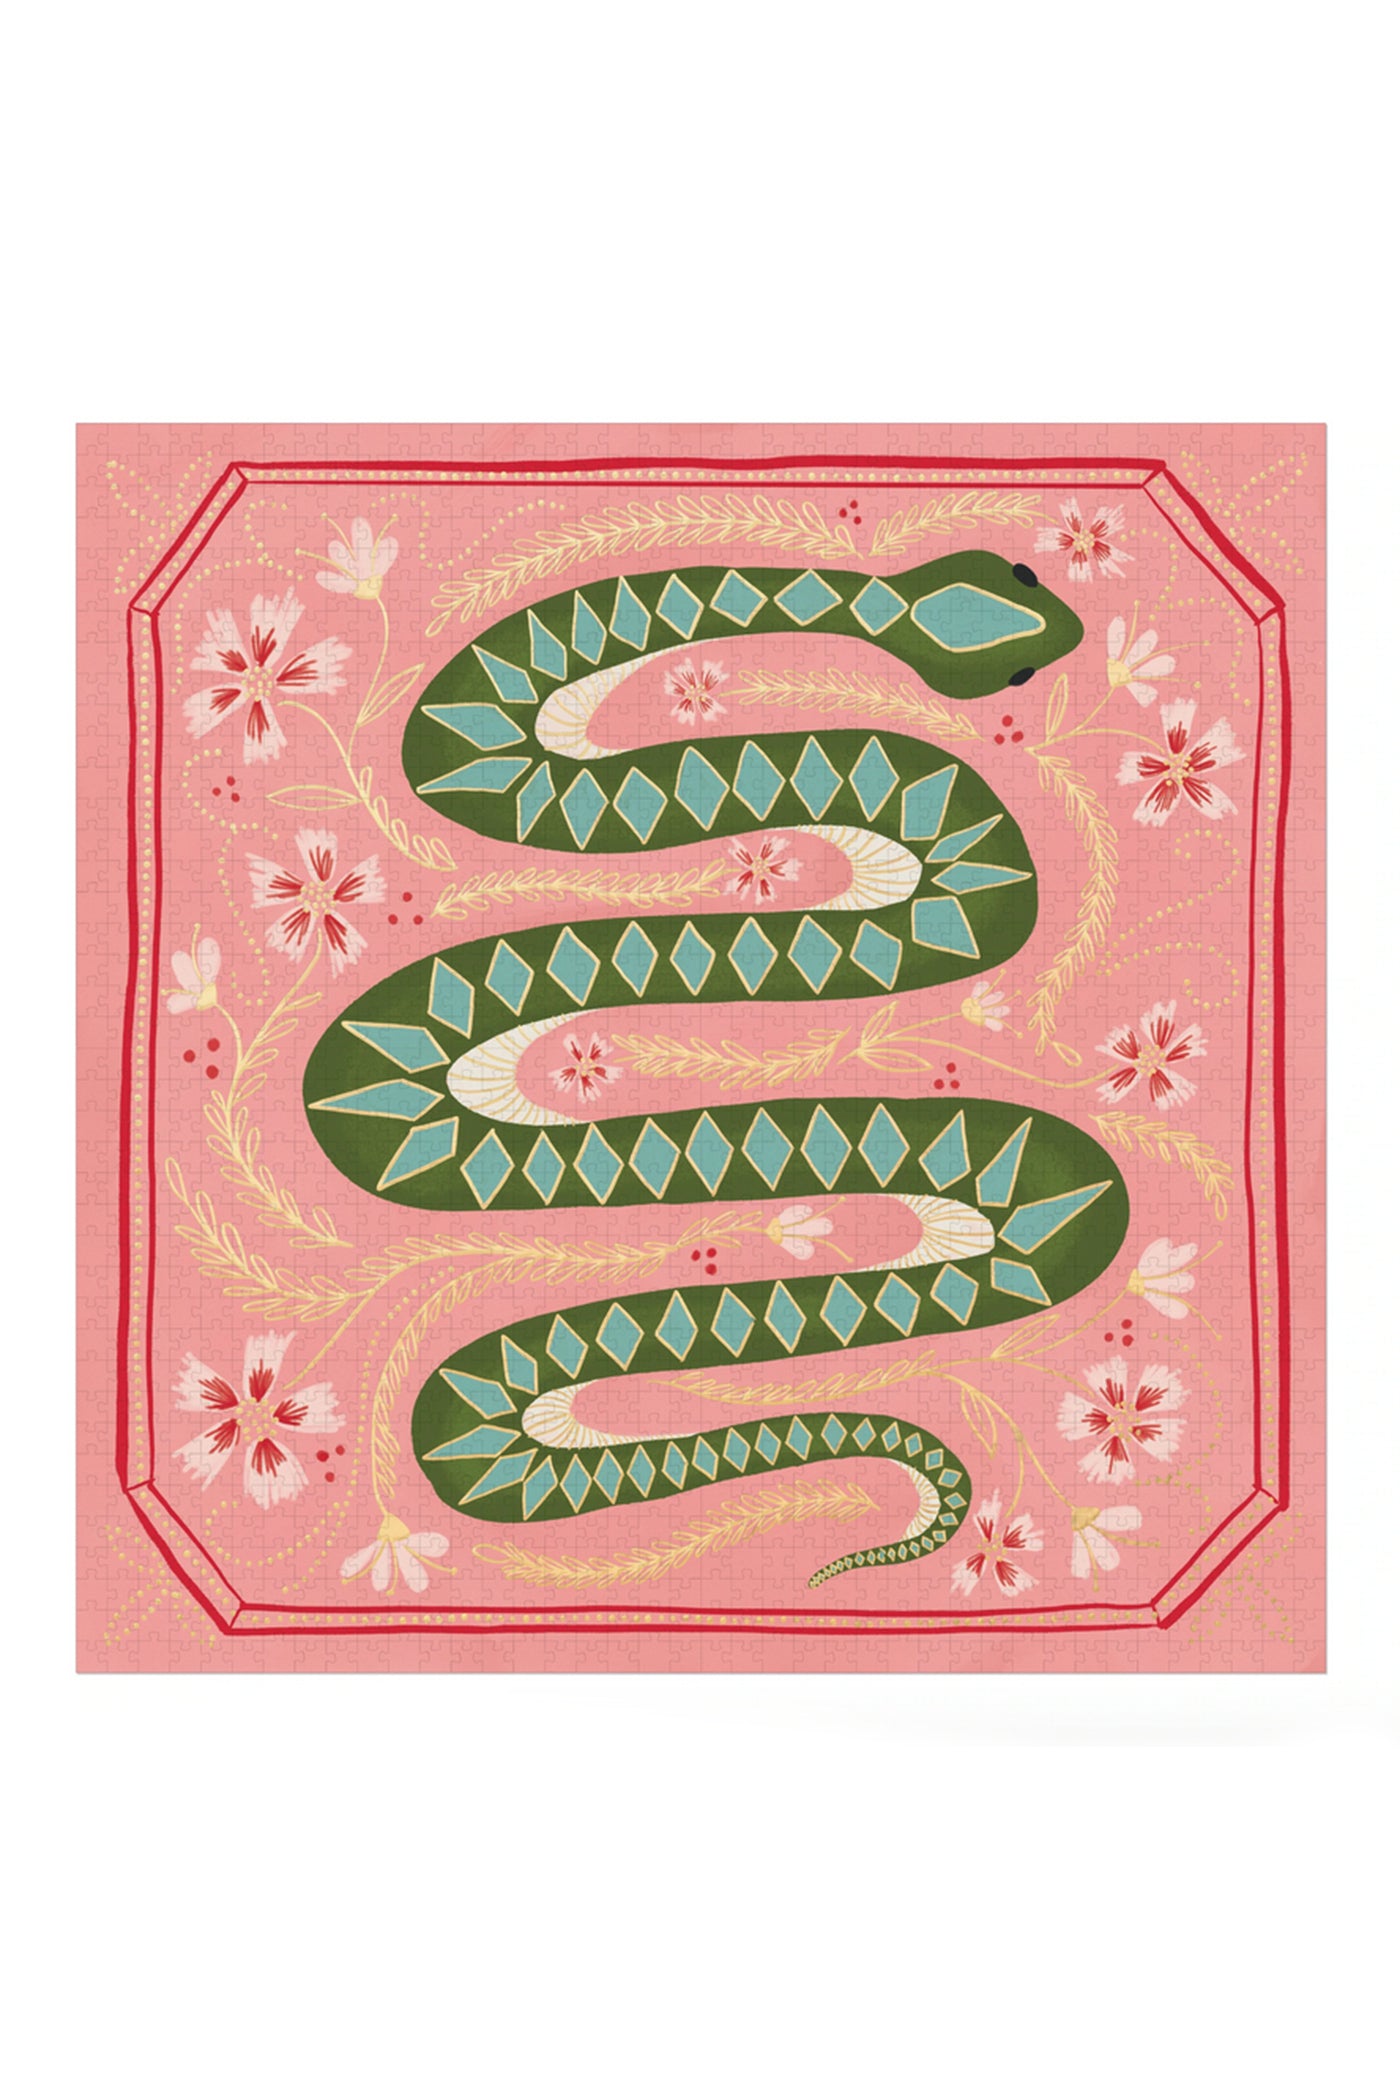 Mister Slithers Puzzle by Design Works Ink